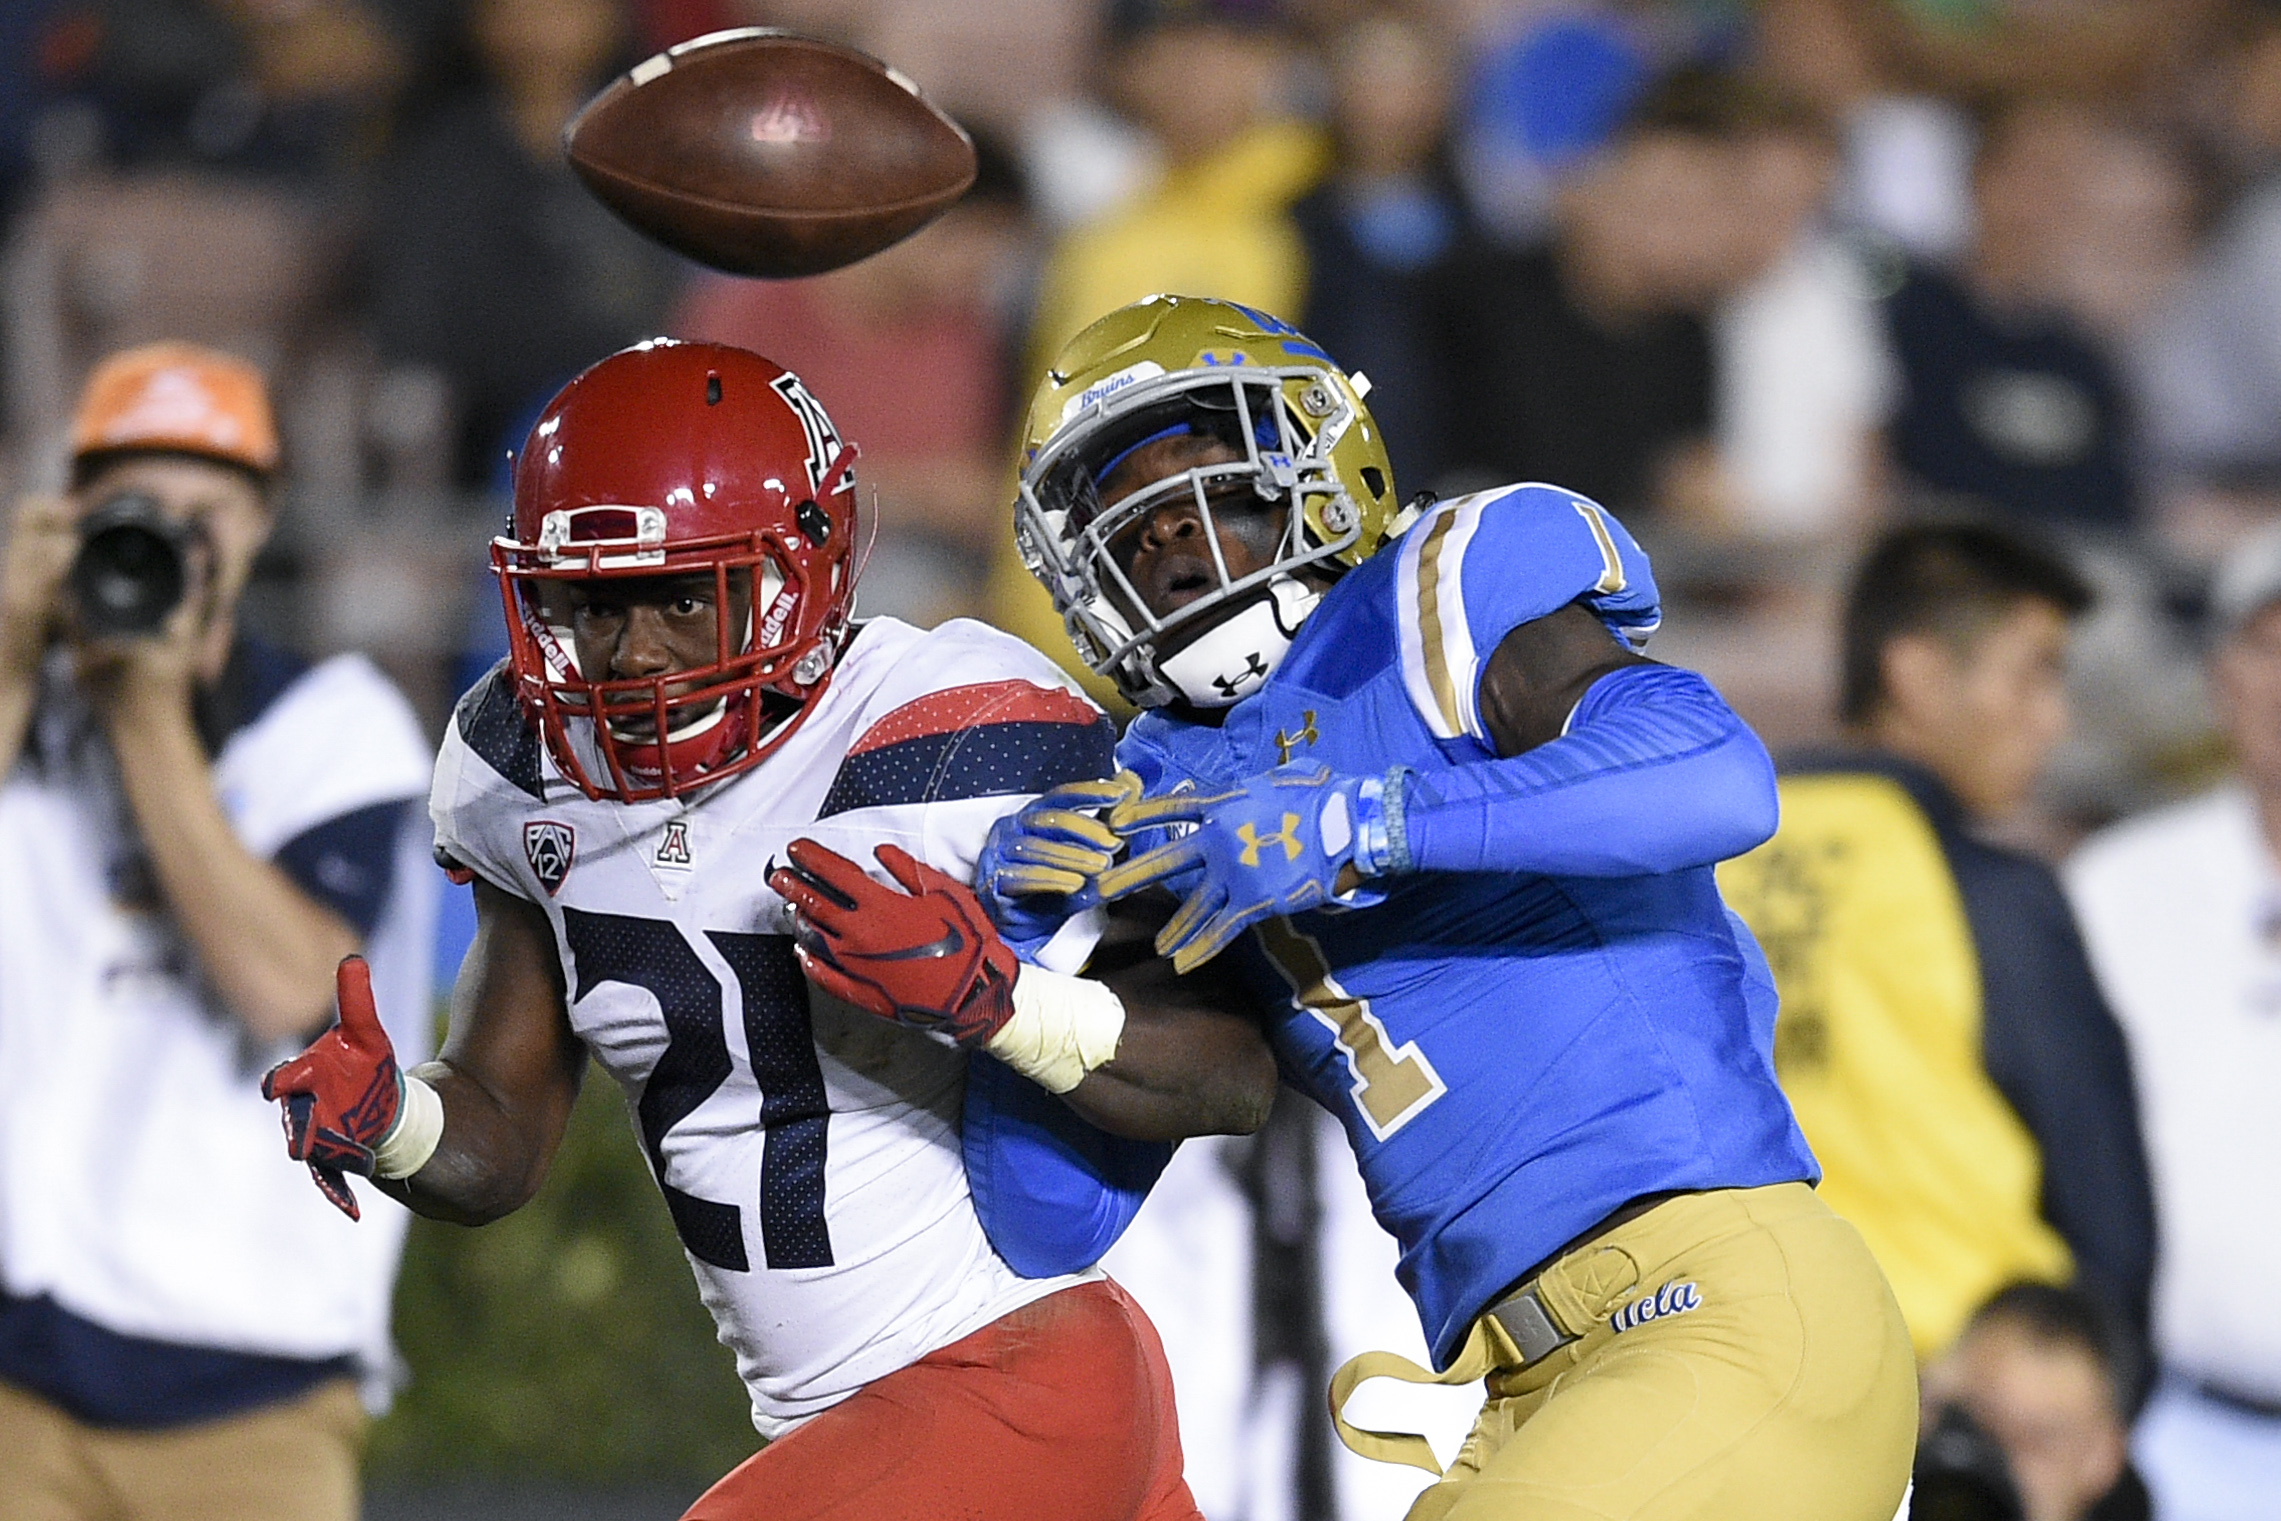 UCLA Bruins defensive back Darnay Holmes (1) knocks the ball away from Arizona Wildcats running back J.J. Taylor (21) for a fumble during the first half at Rose Bowl. 